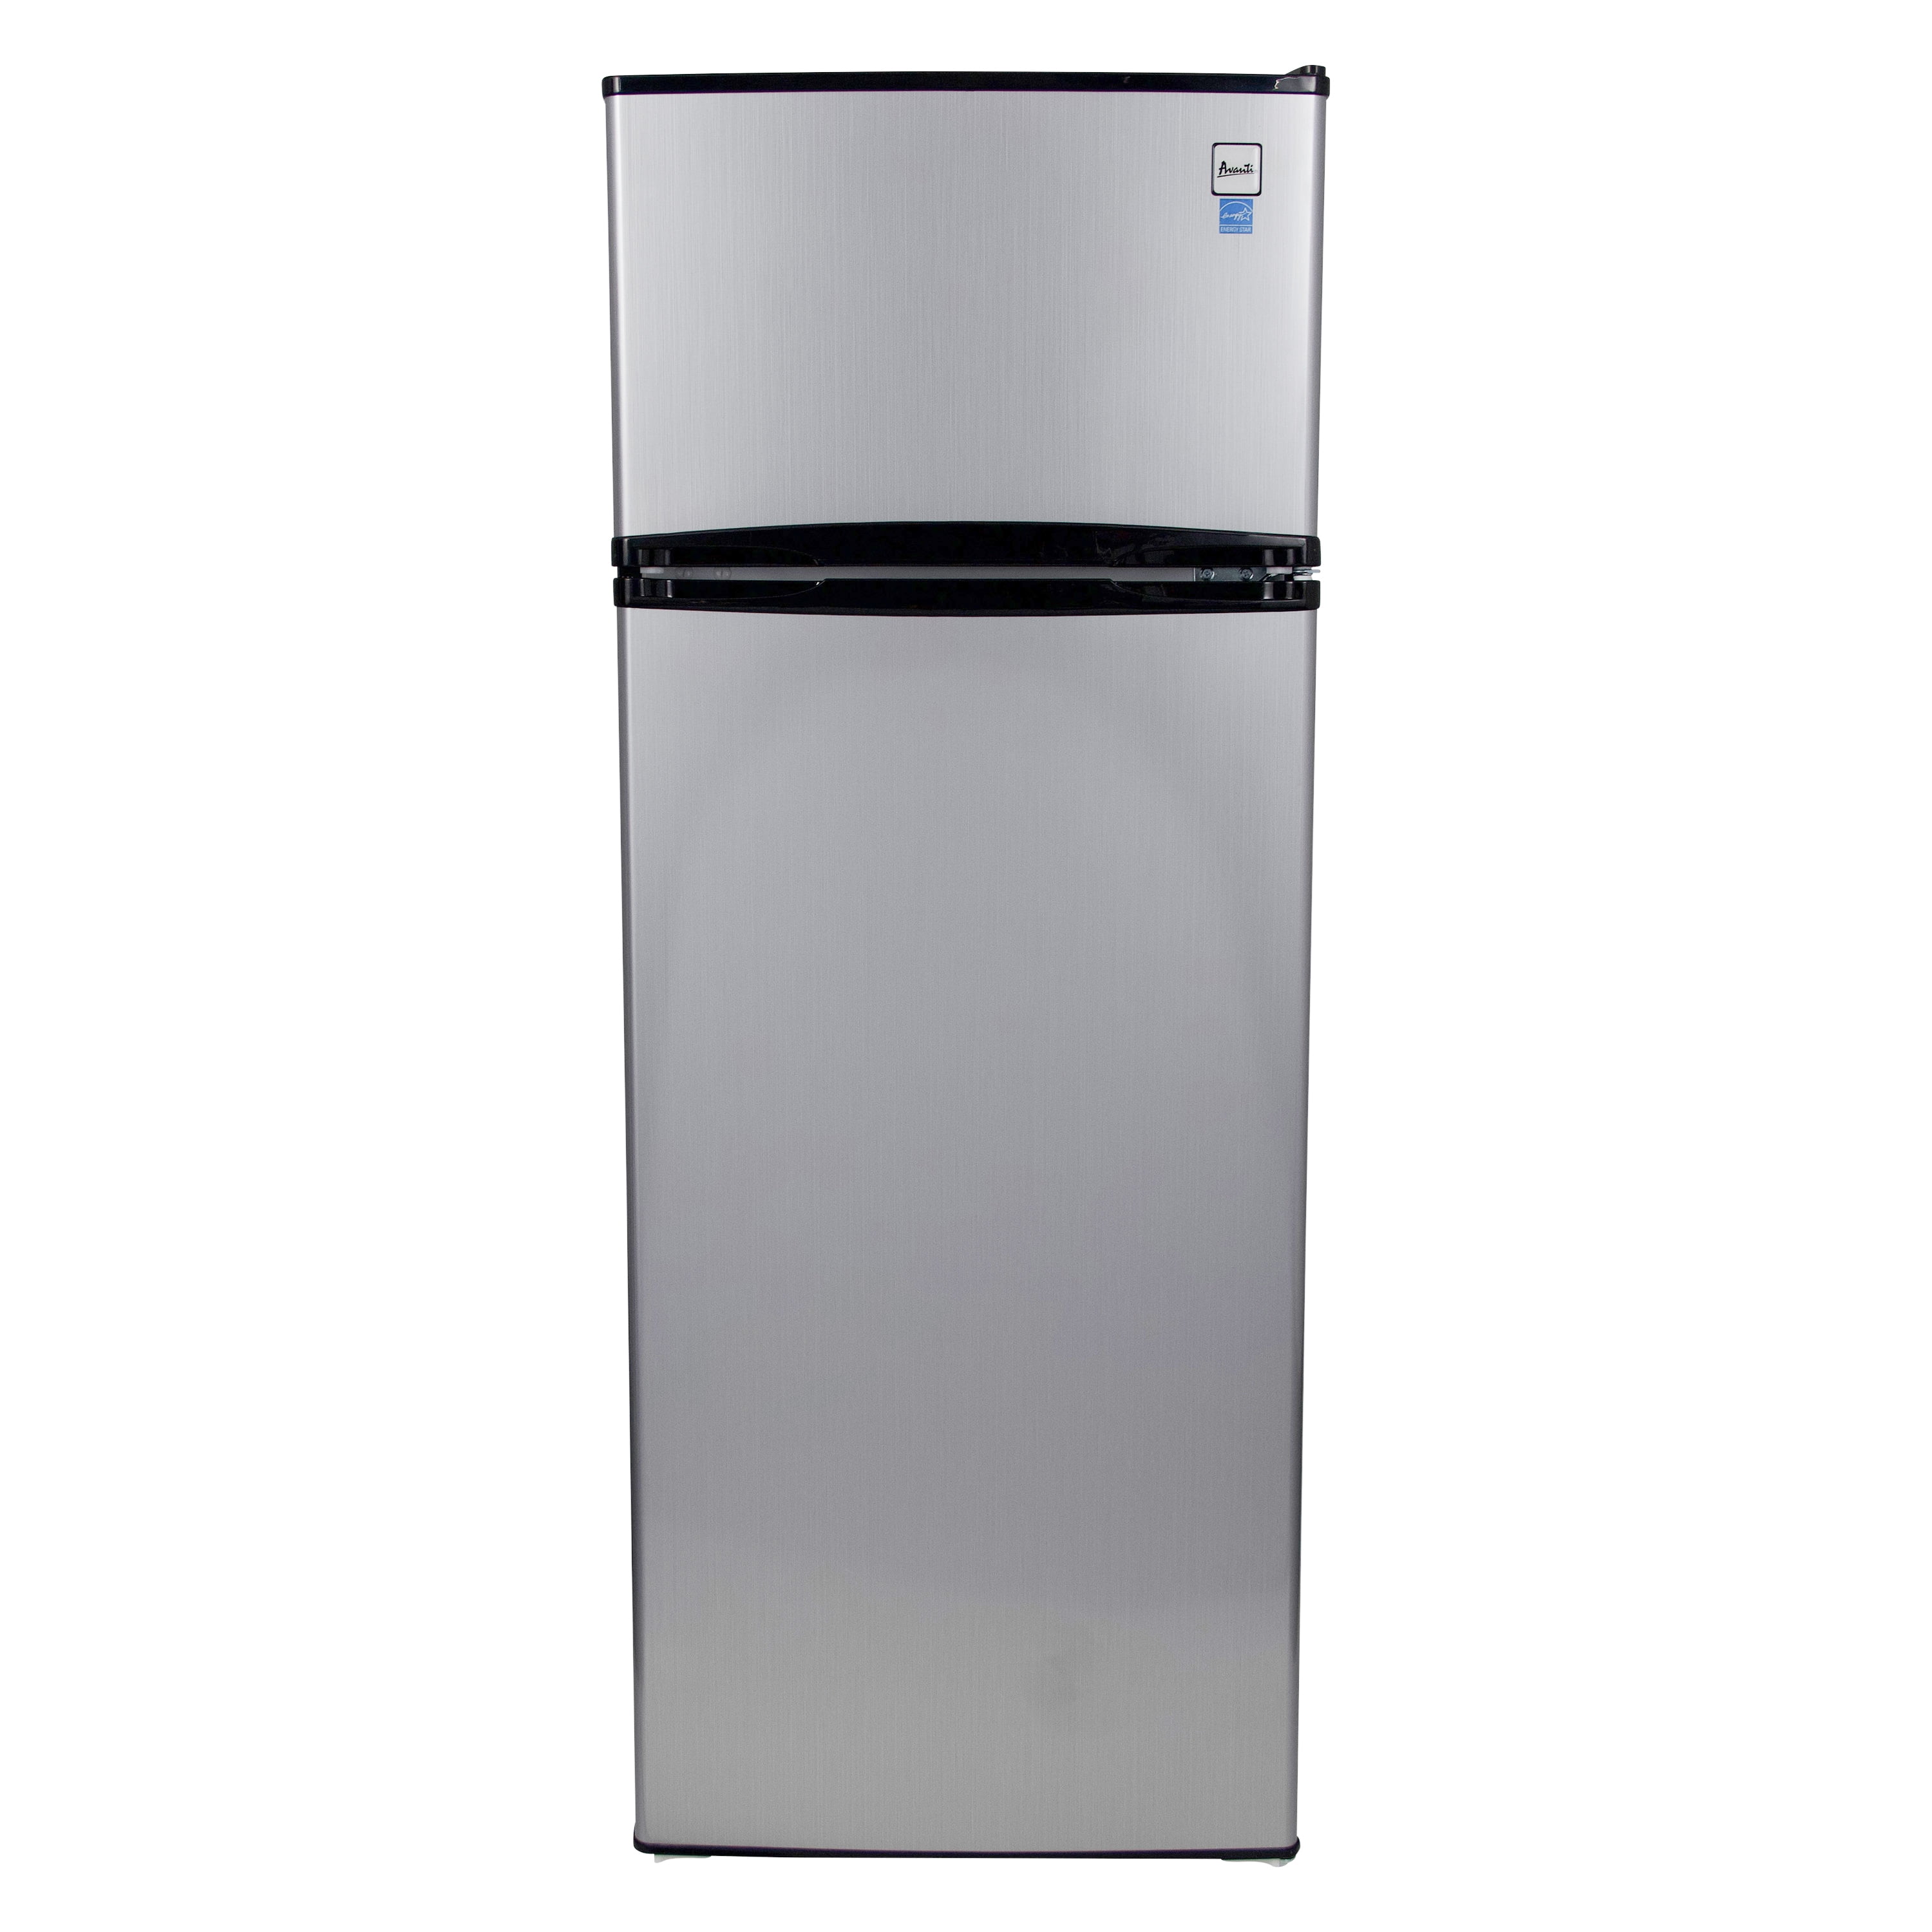 Avanti 9.2 cu. ft. Apartment Size Refrigerator, in Stainless Steel  (FFBM92H3S)